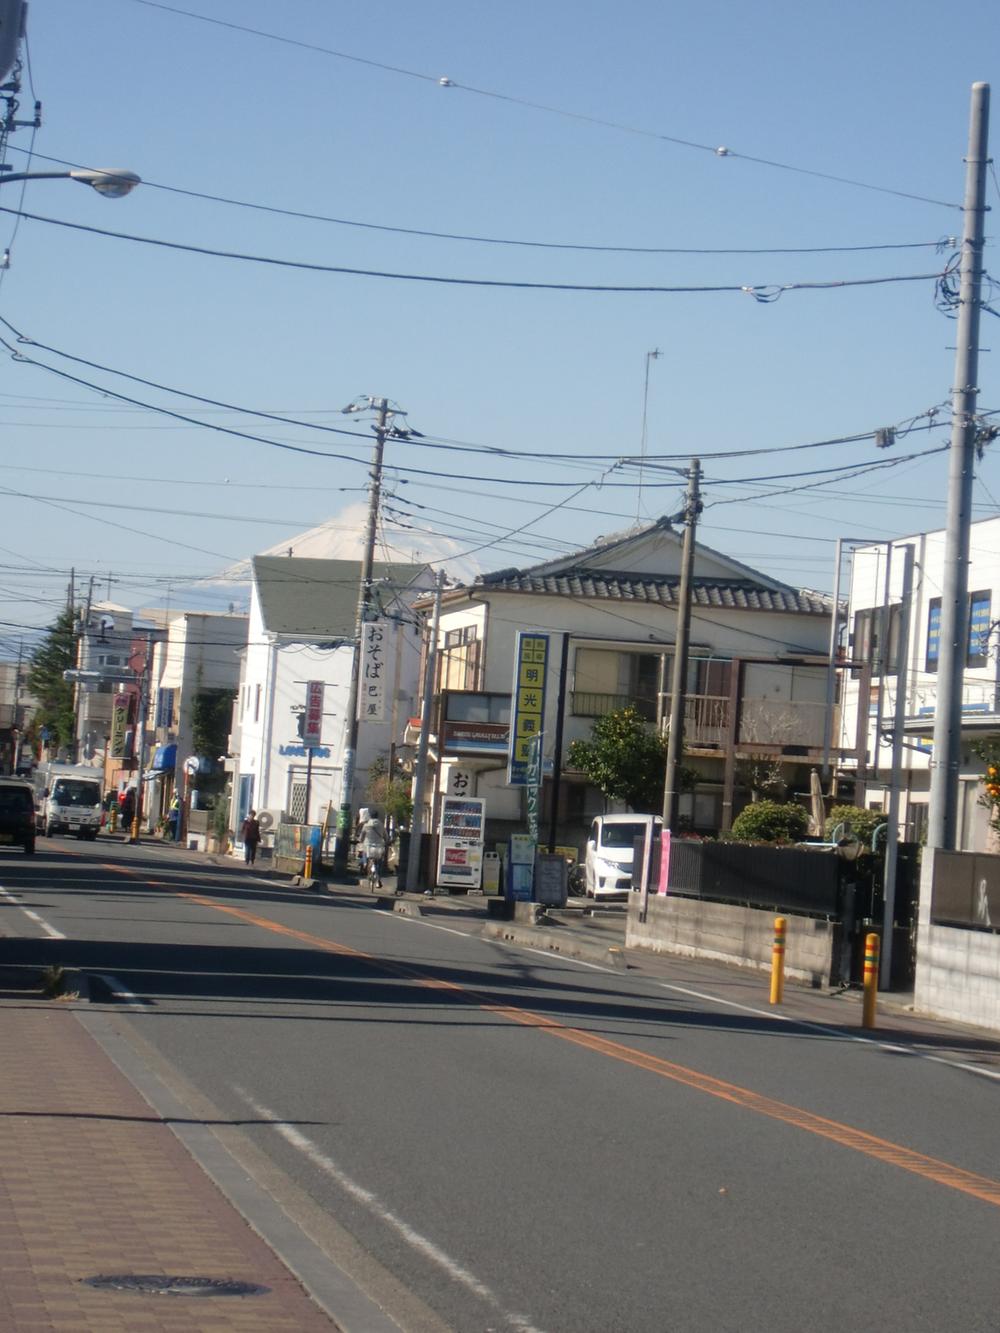 Streets around. Fuji is also beautiful when viewed from the 150m Sakura road until the road Sakura.